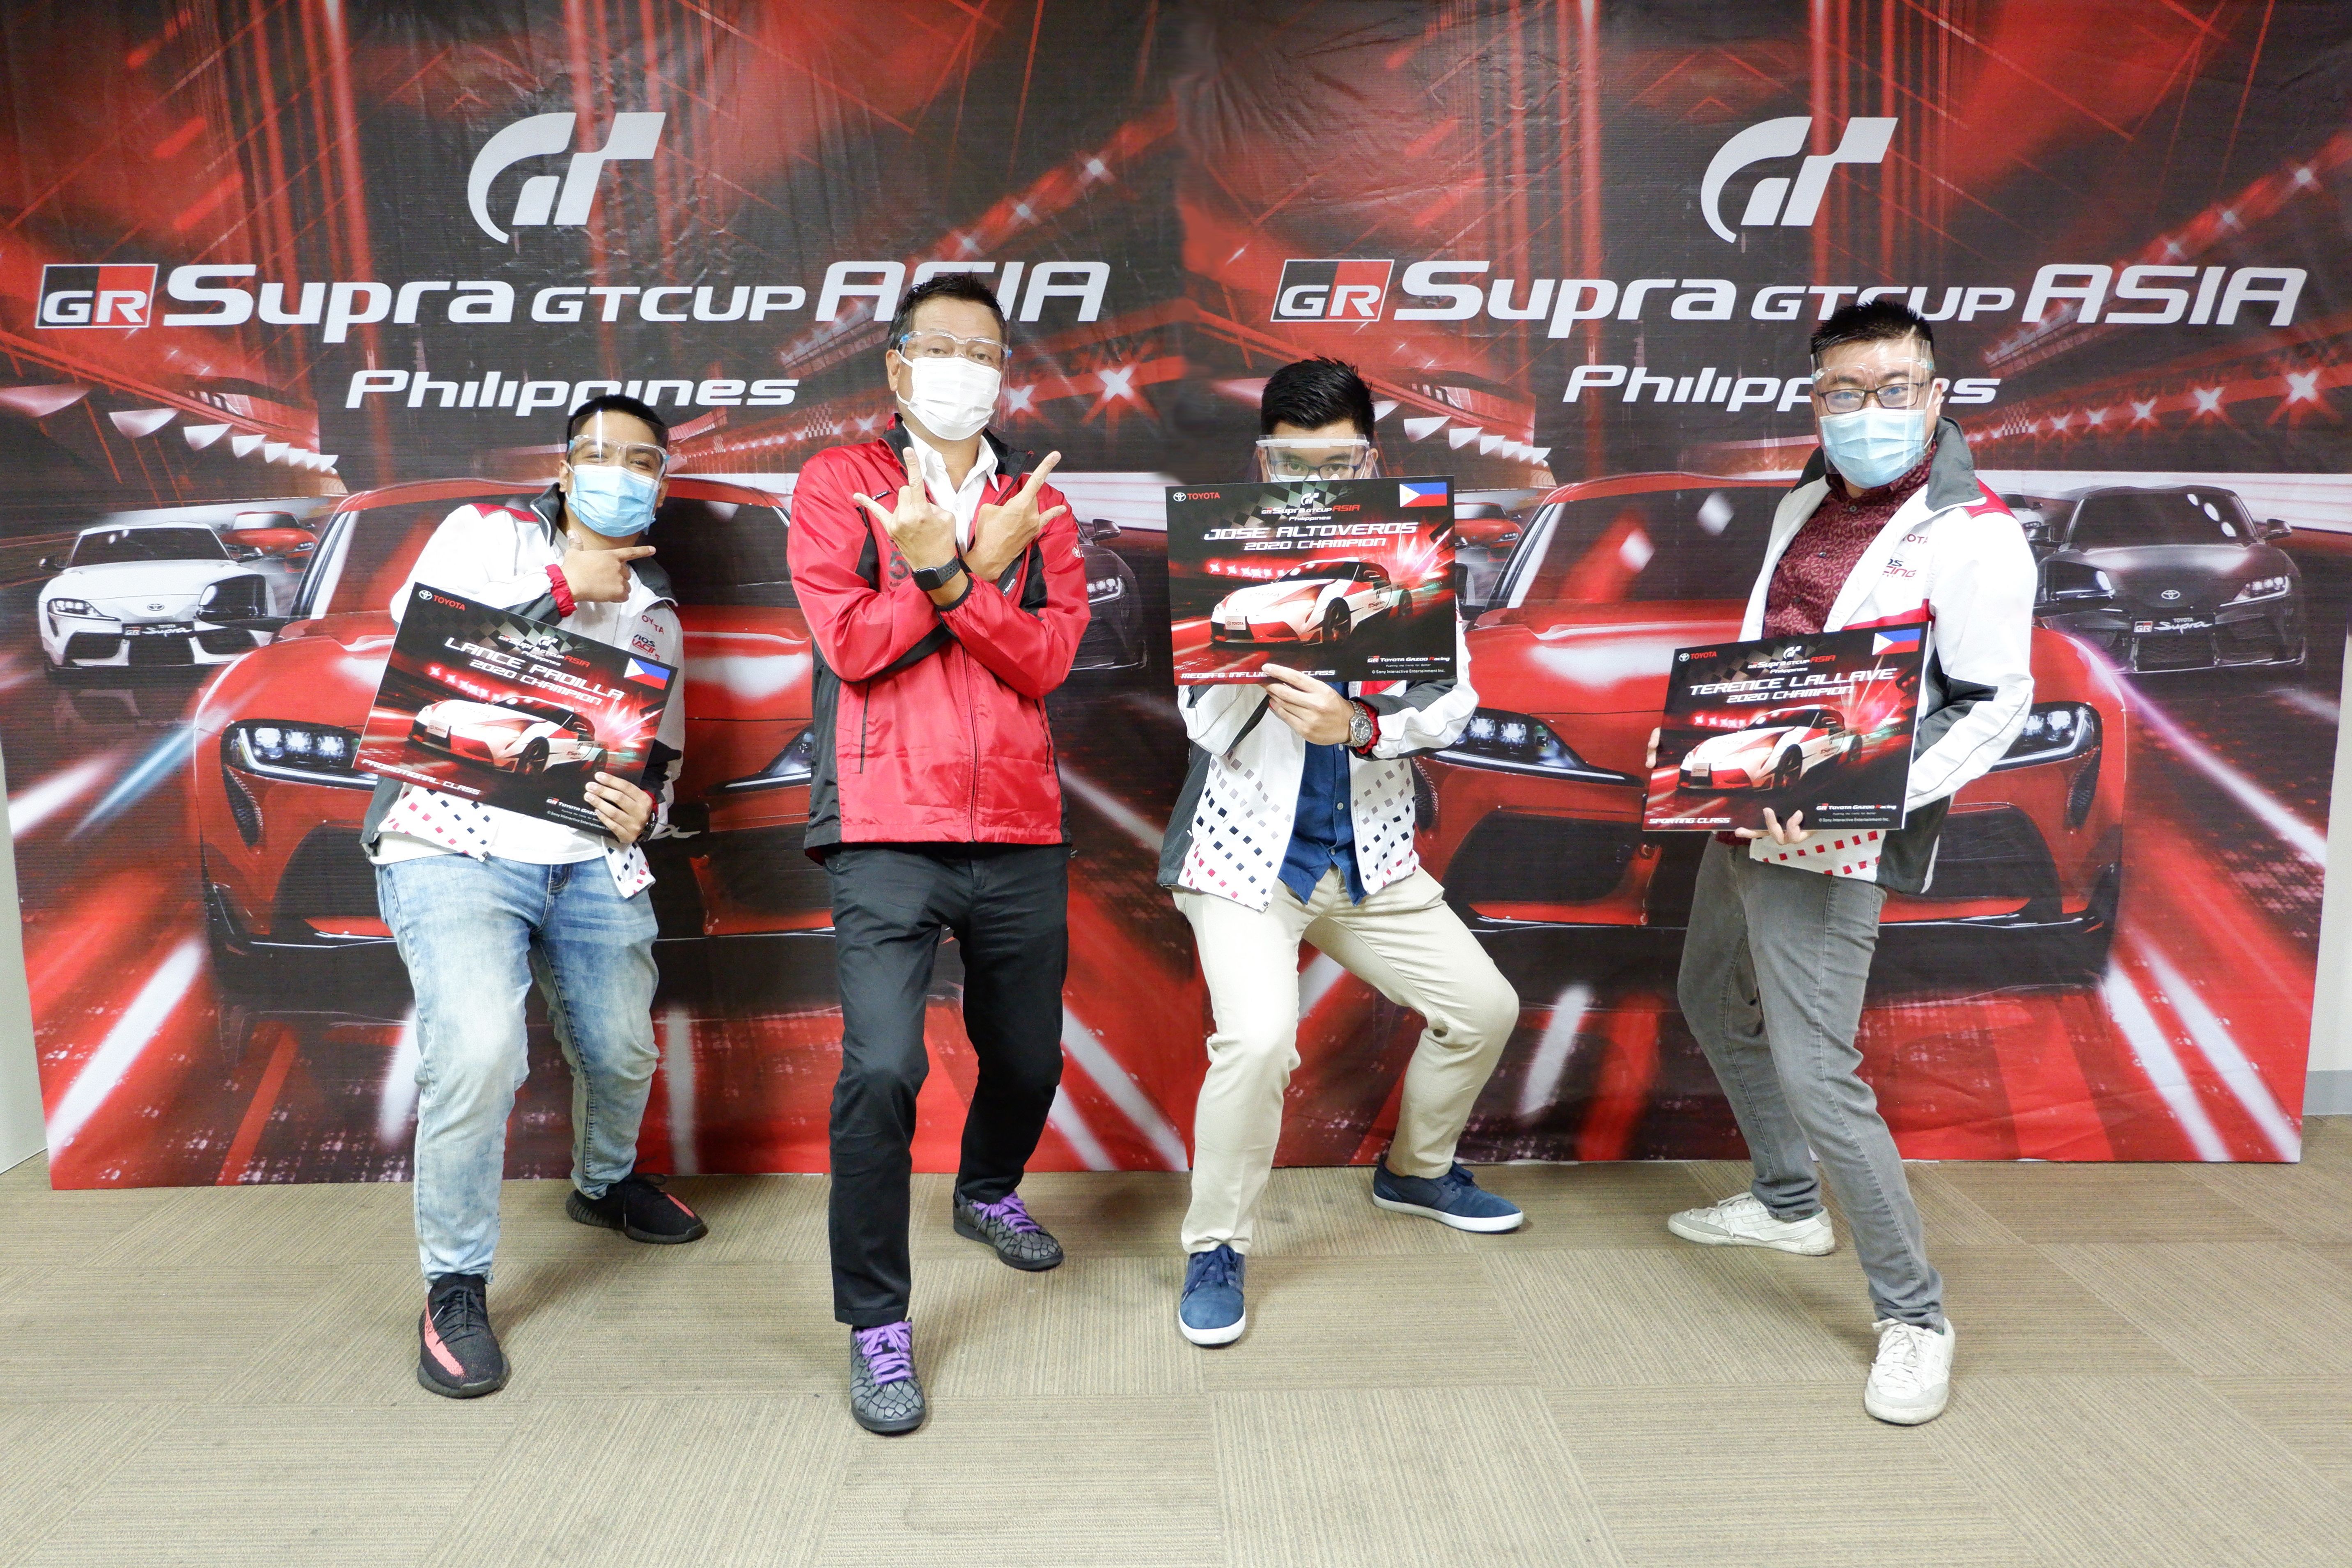 Toyota presents Team PH competing in the GR Supra GT Cup Asia